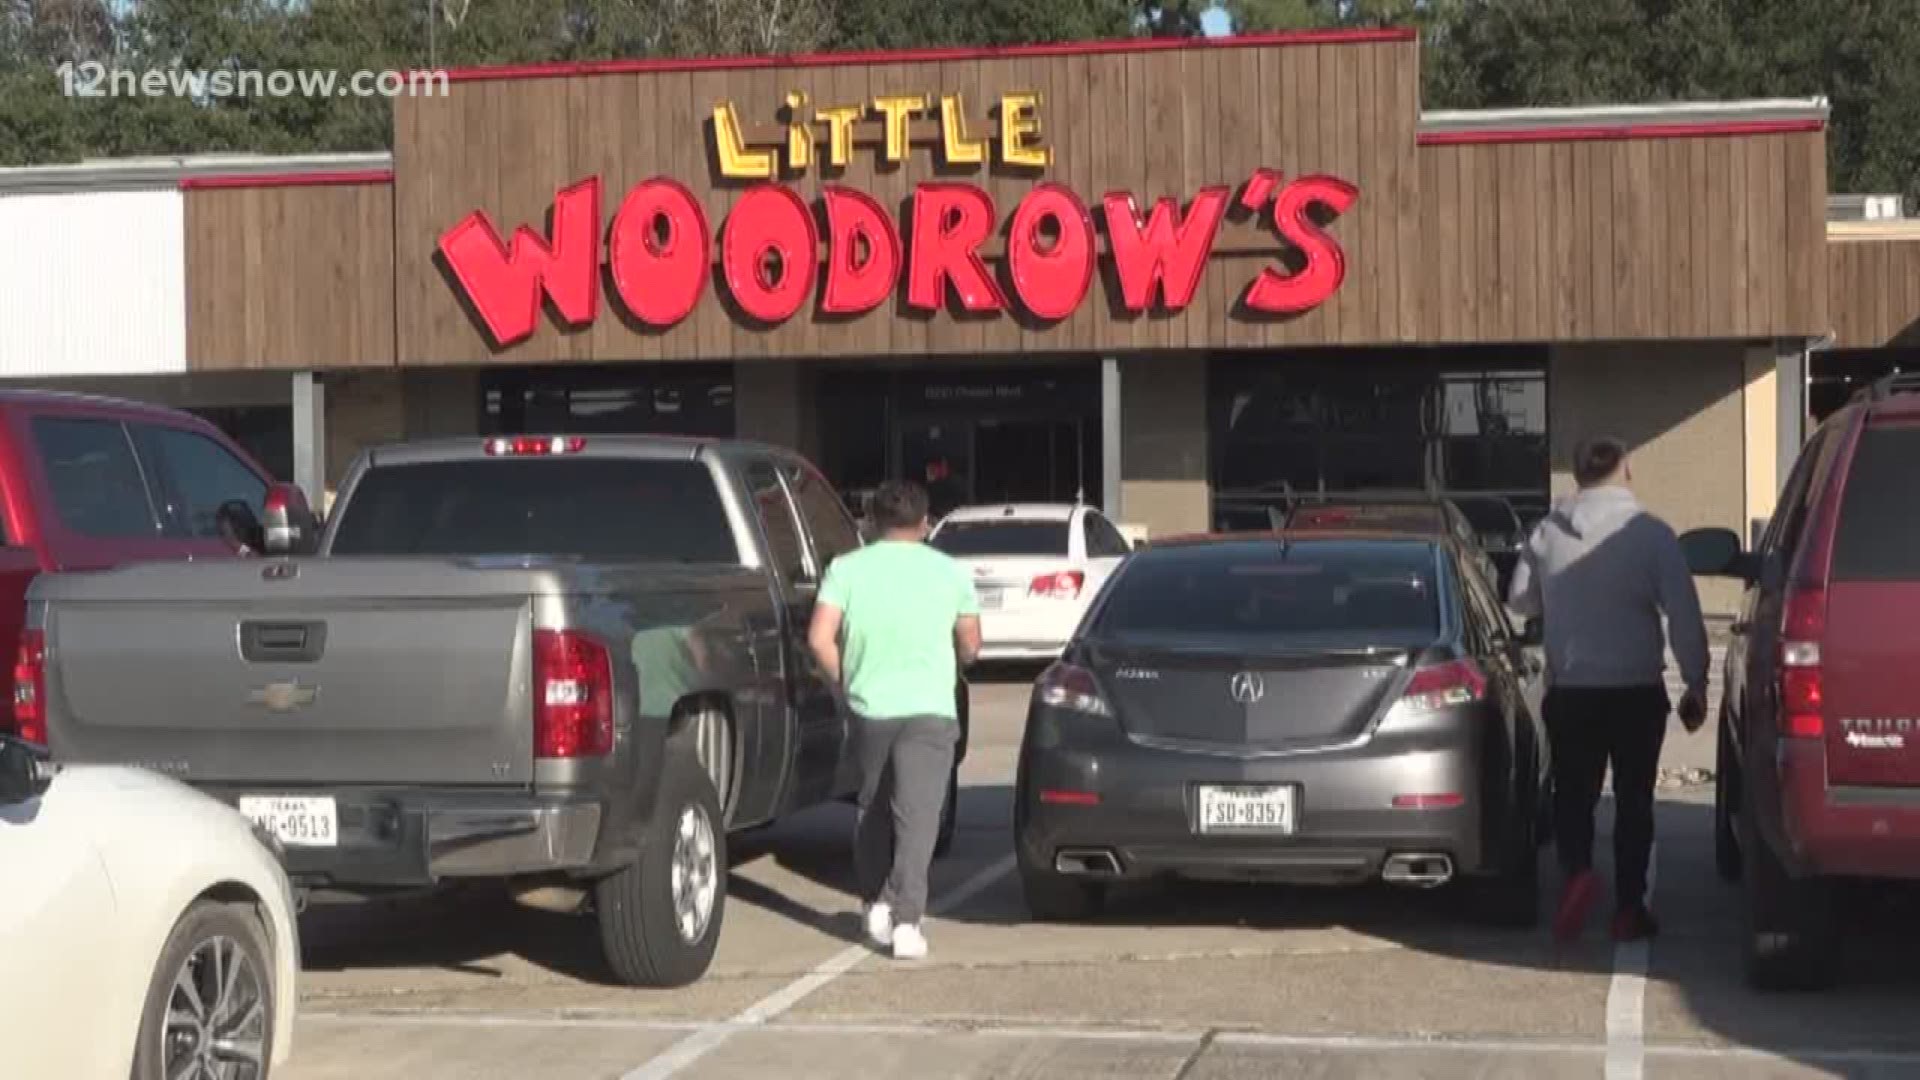 Beaumont City Council has voted to allow Little Woodrow's to apply for a specific use permit with the Beaumont Planning Commission.